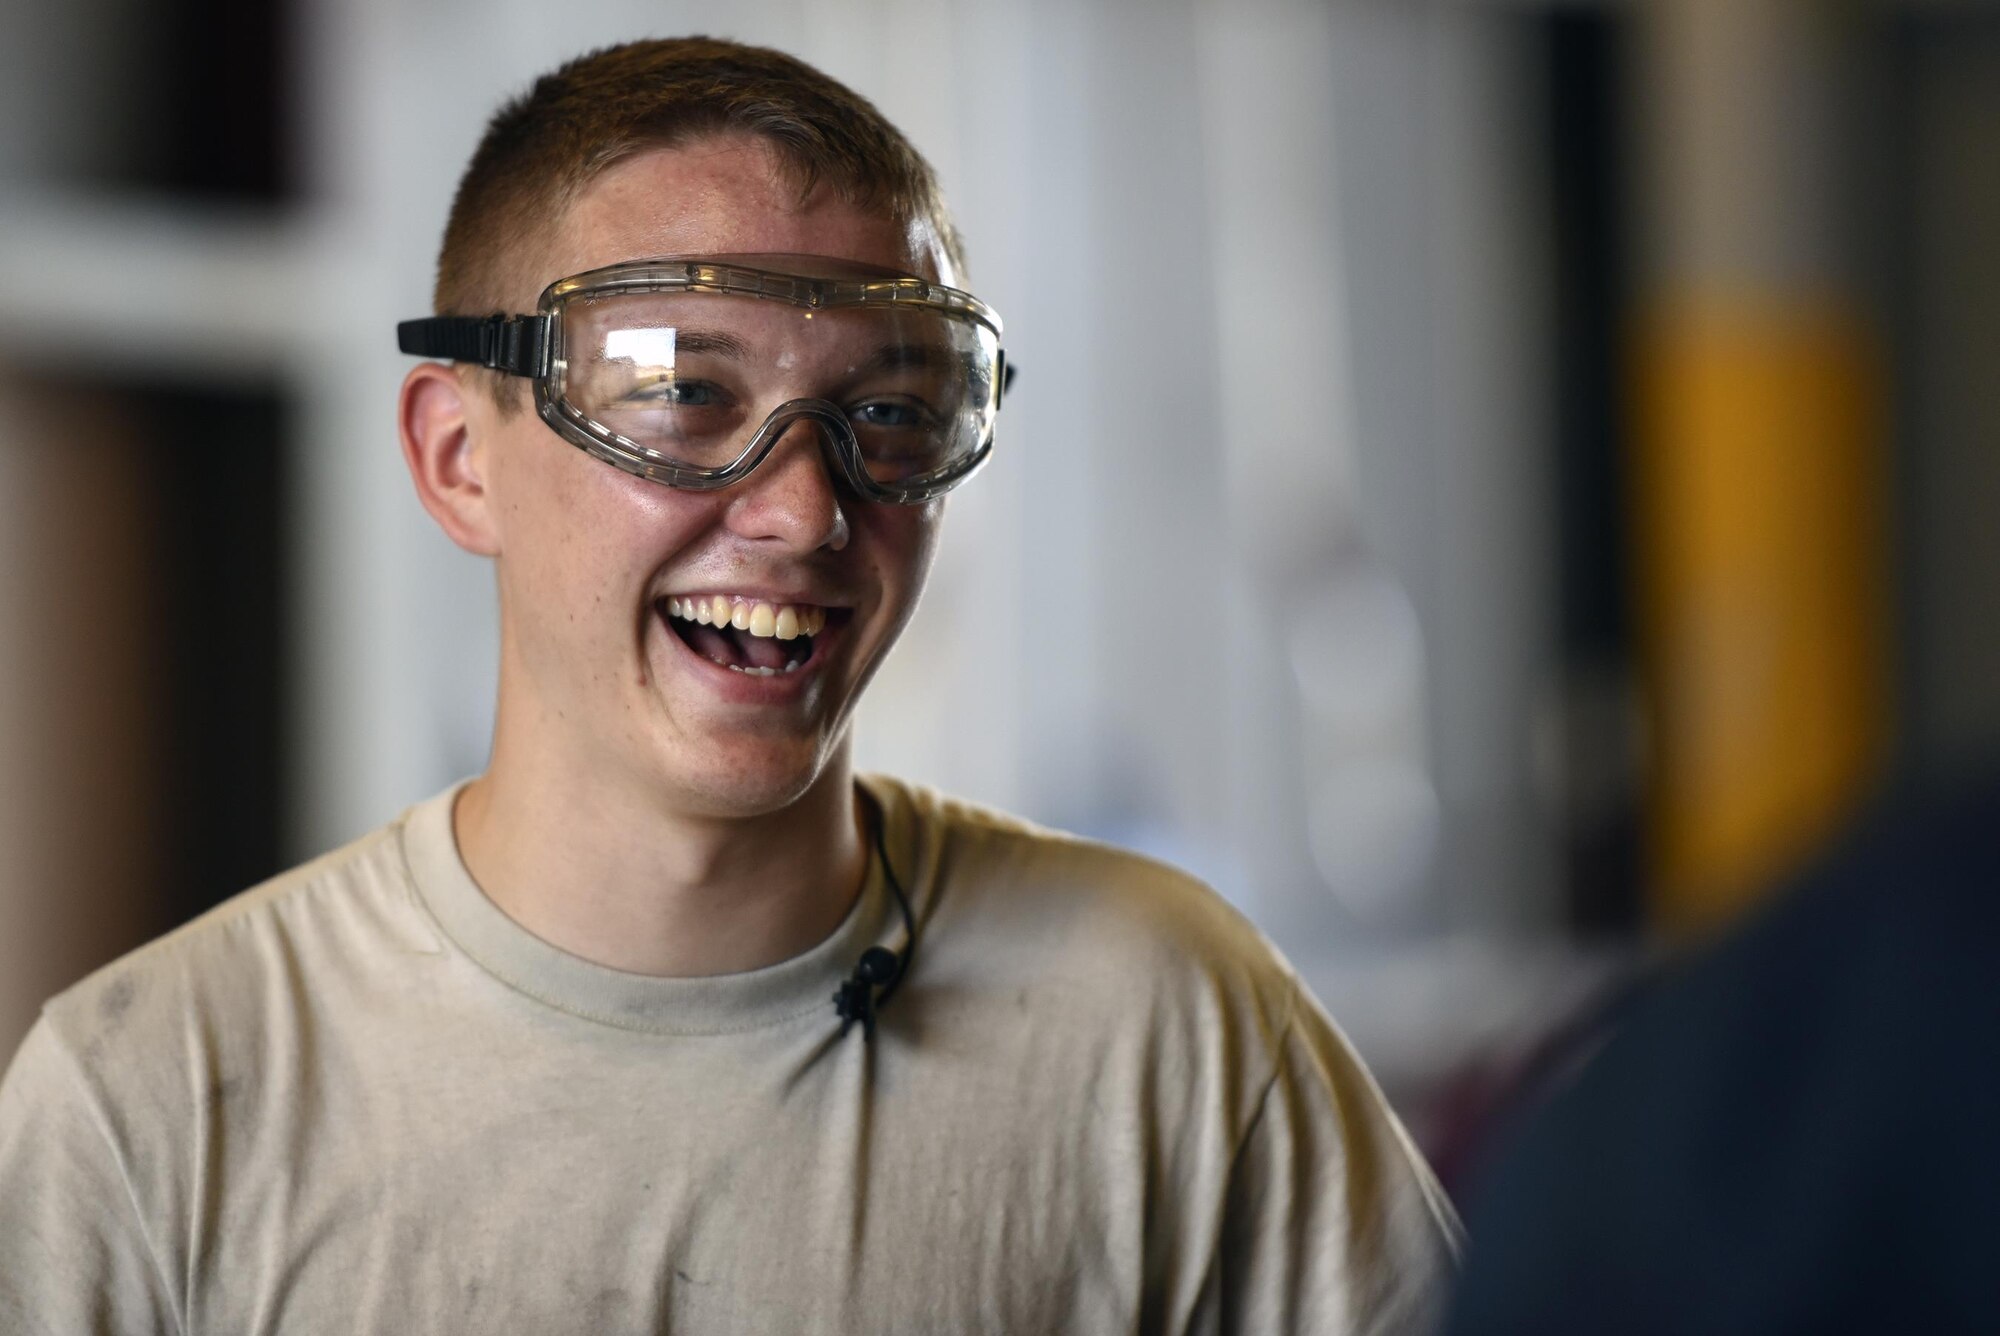 Airman 1st Class Charles Price, 23d Logistics Readiness Squadron vehicle maintenance specialist, shares a laugh during an interview as part of the ‘A Closer Look’ video series, July 13, 2017, at Moody Air Force Base, Ga. The series shows 23d WG PA broadcasters experiencing the grit and grime of several trades for Airmen to better understand and appreciate different missions. To watch the series, stay tuned for the premier on the Moody Facebook page and www.moody.af.mil, August 15. (U.S. Air Force photo by Senior Airman Greg Nash)